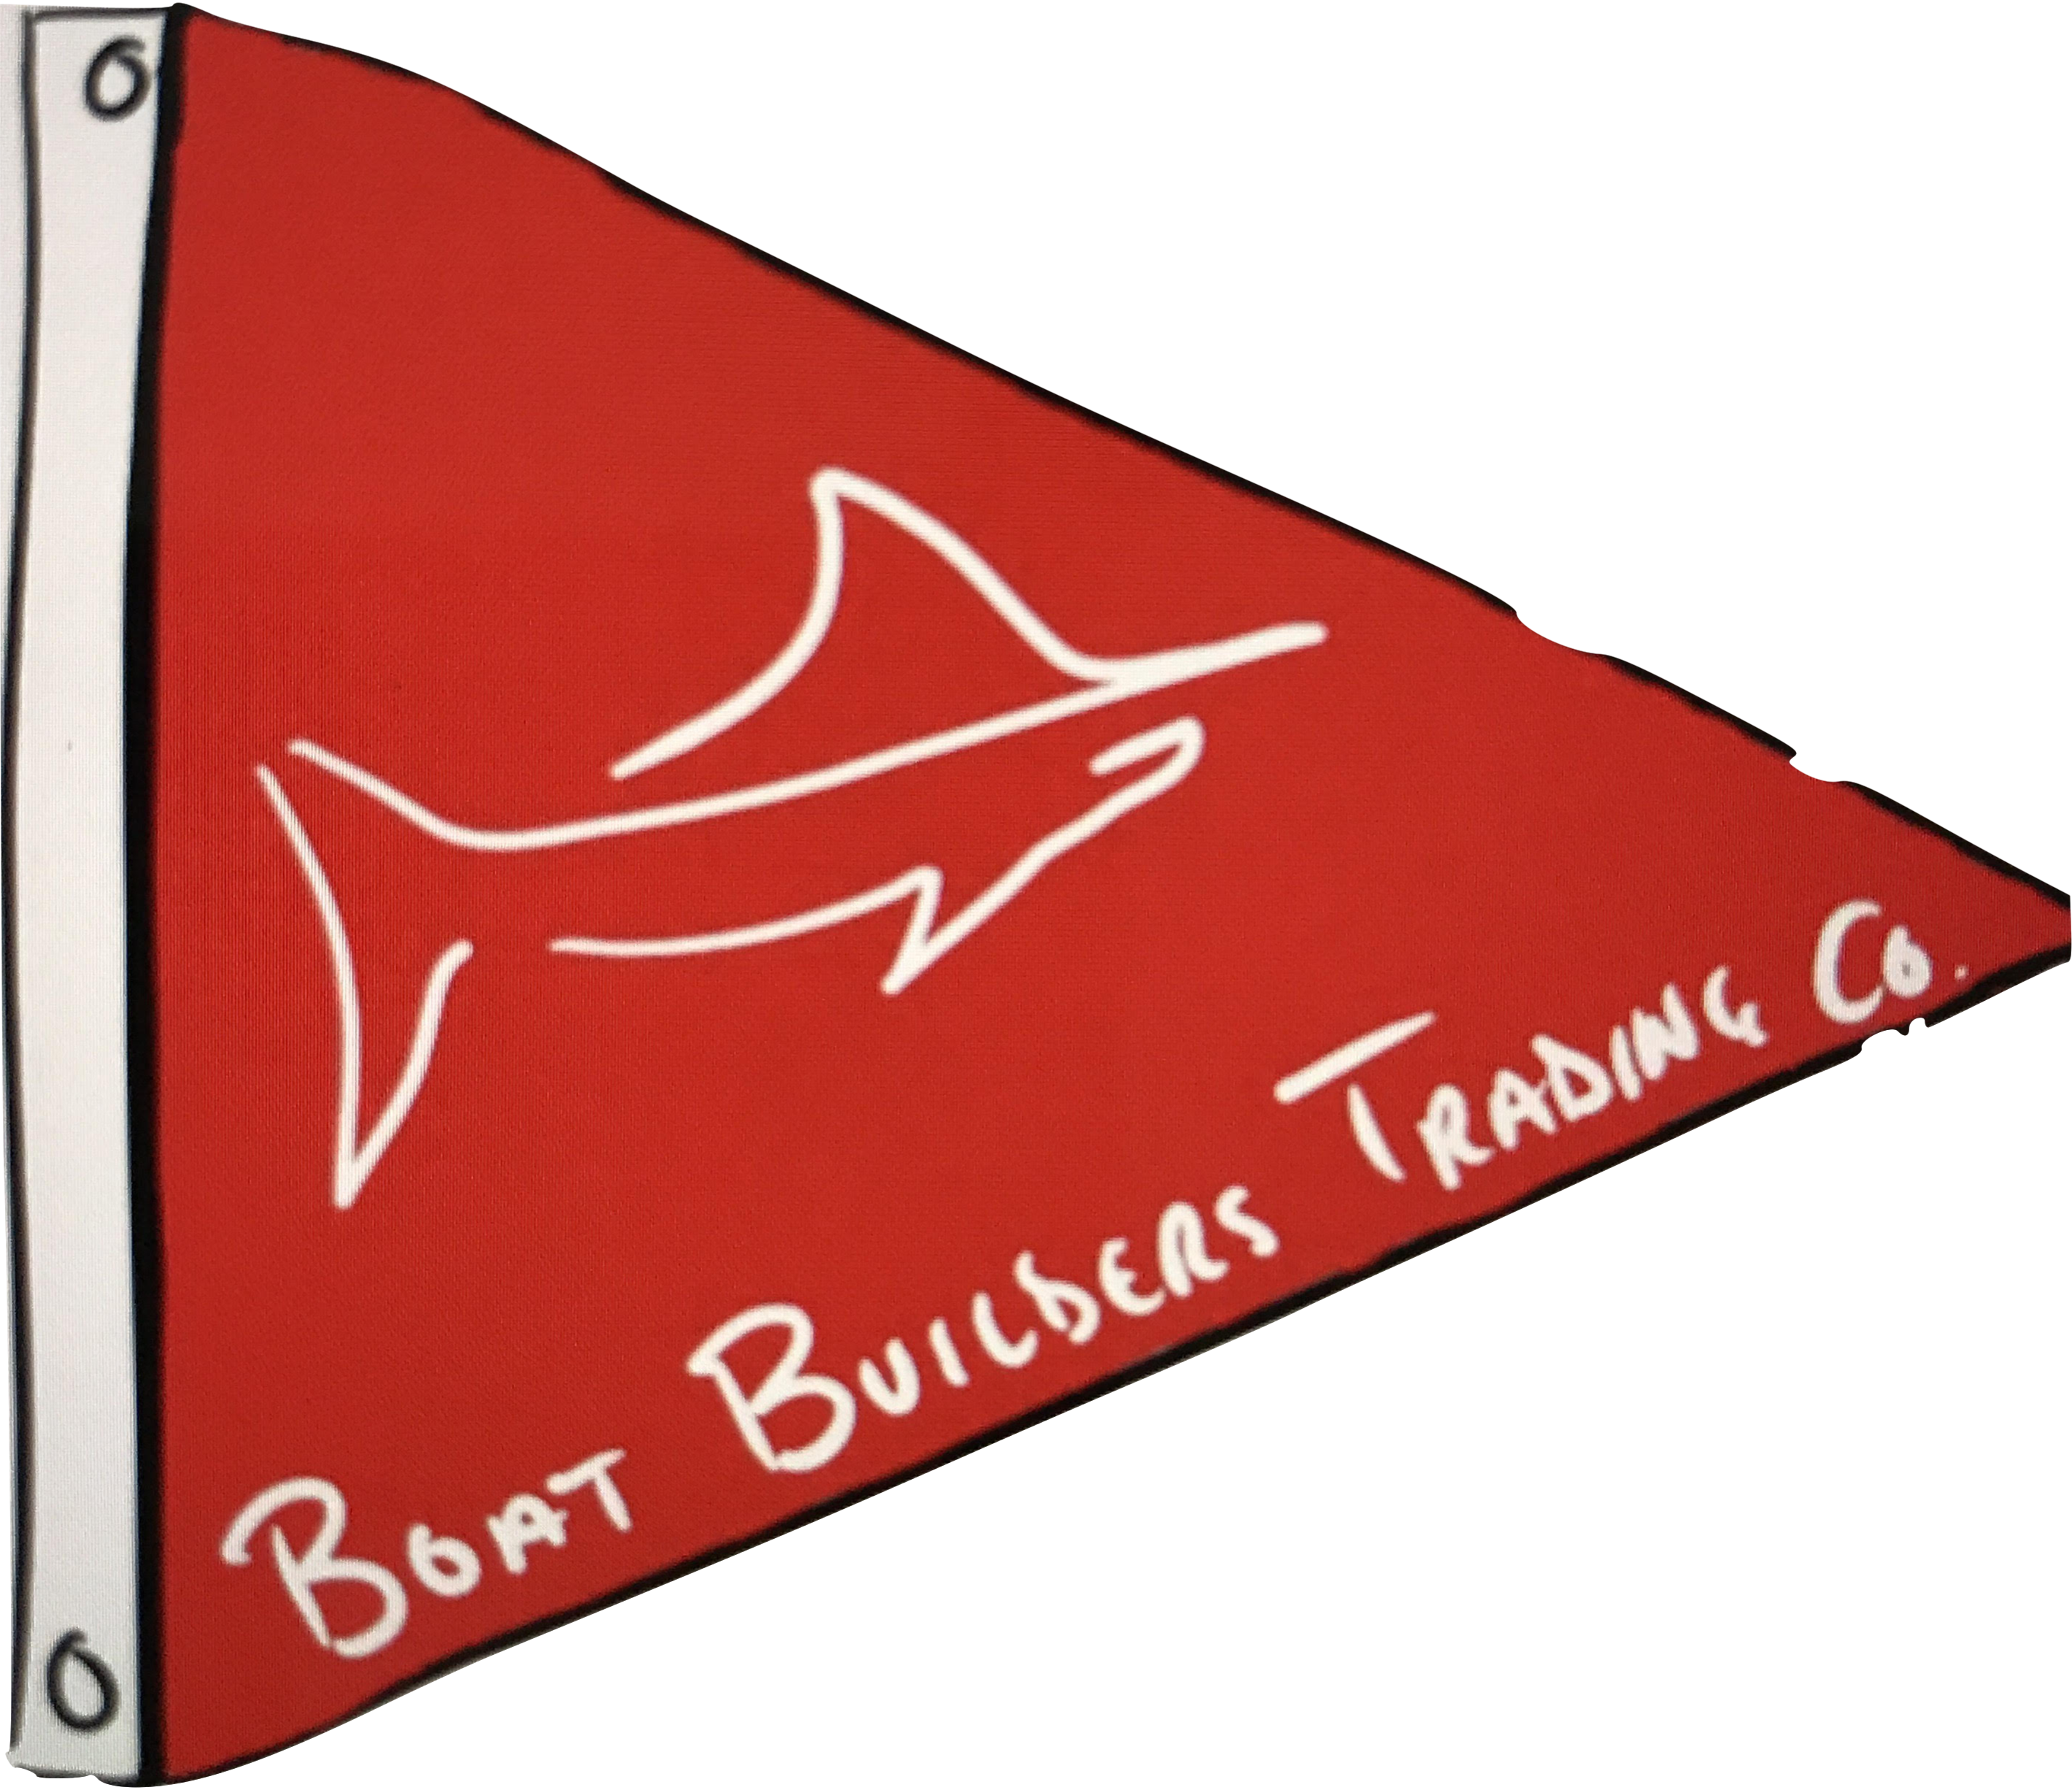 The Boat Builders Logo